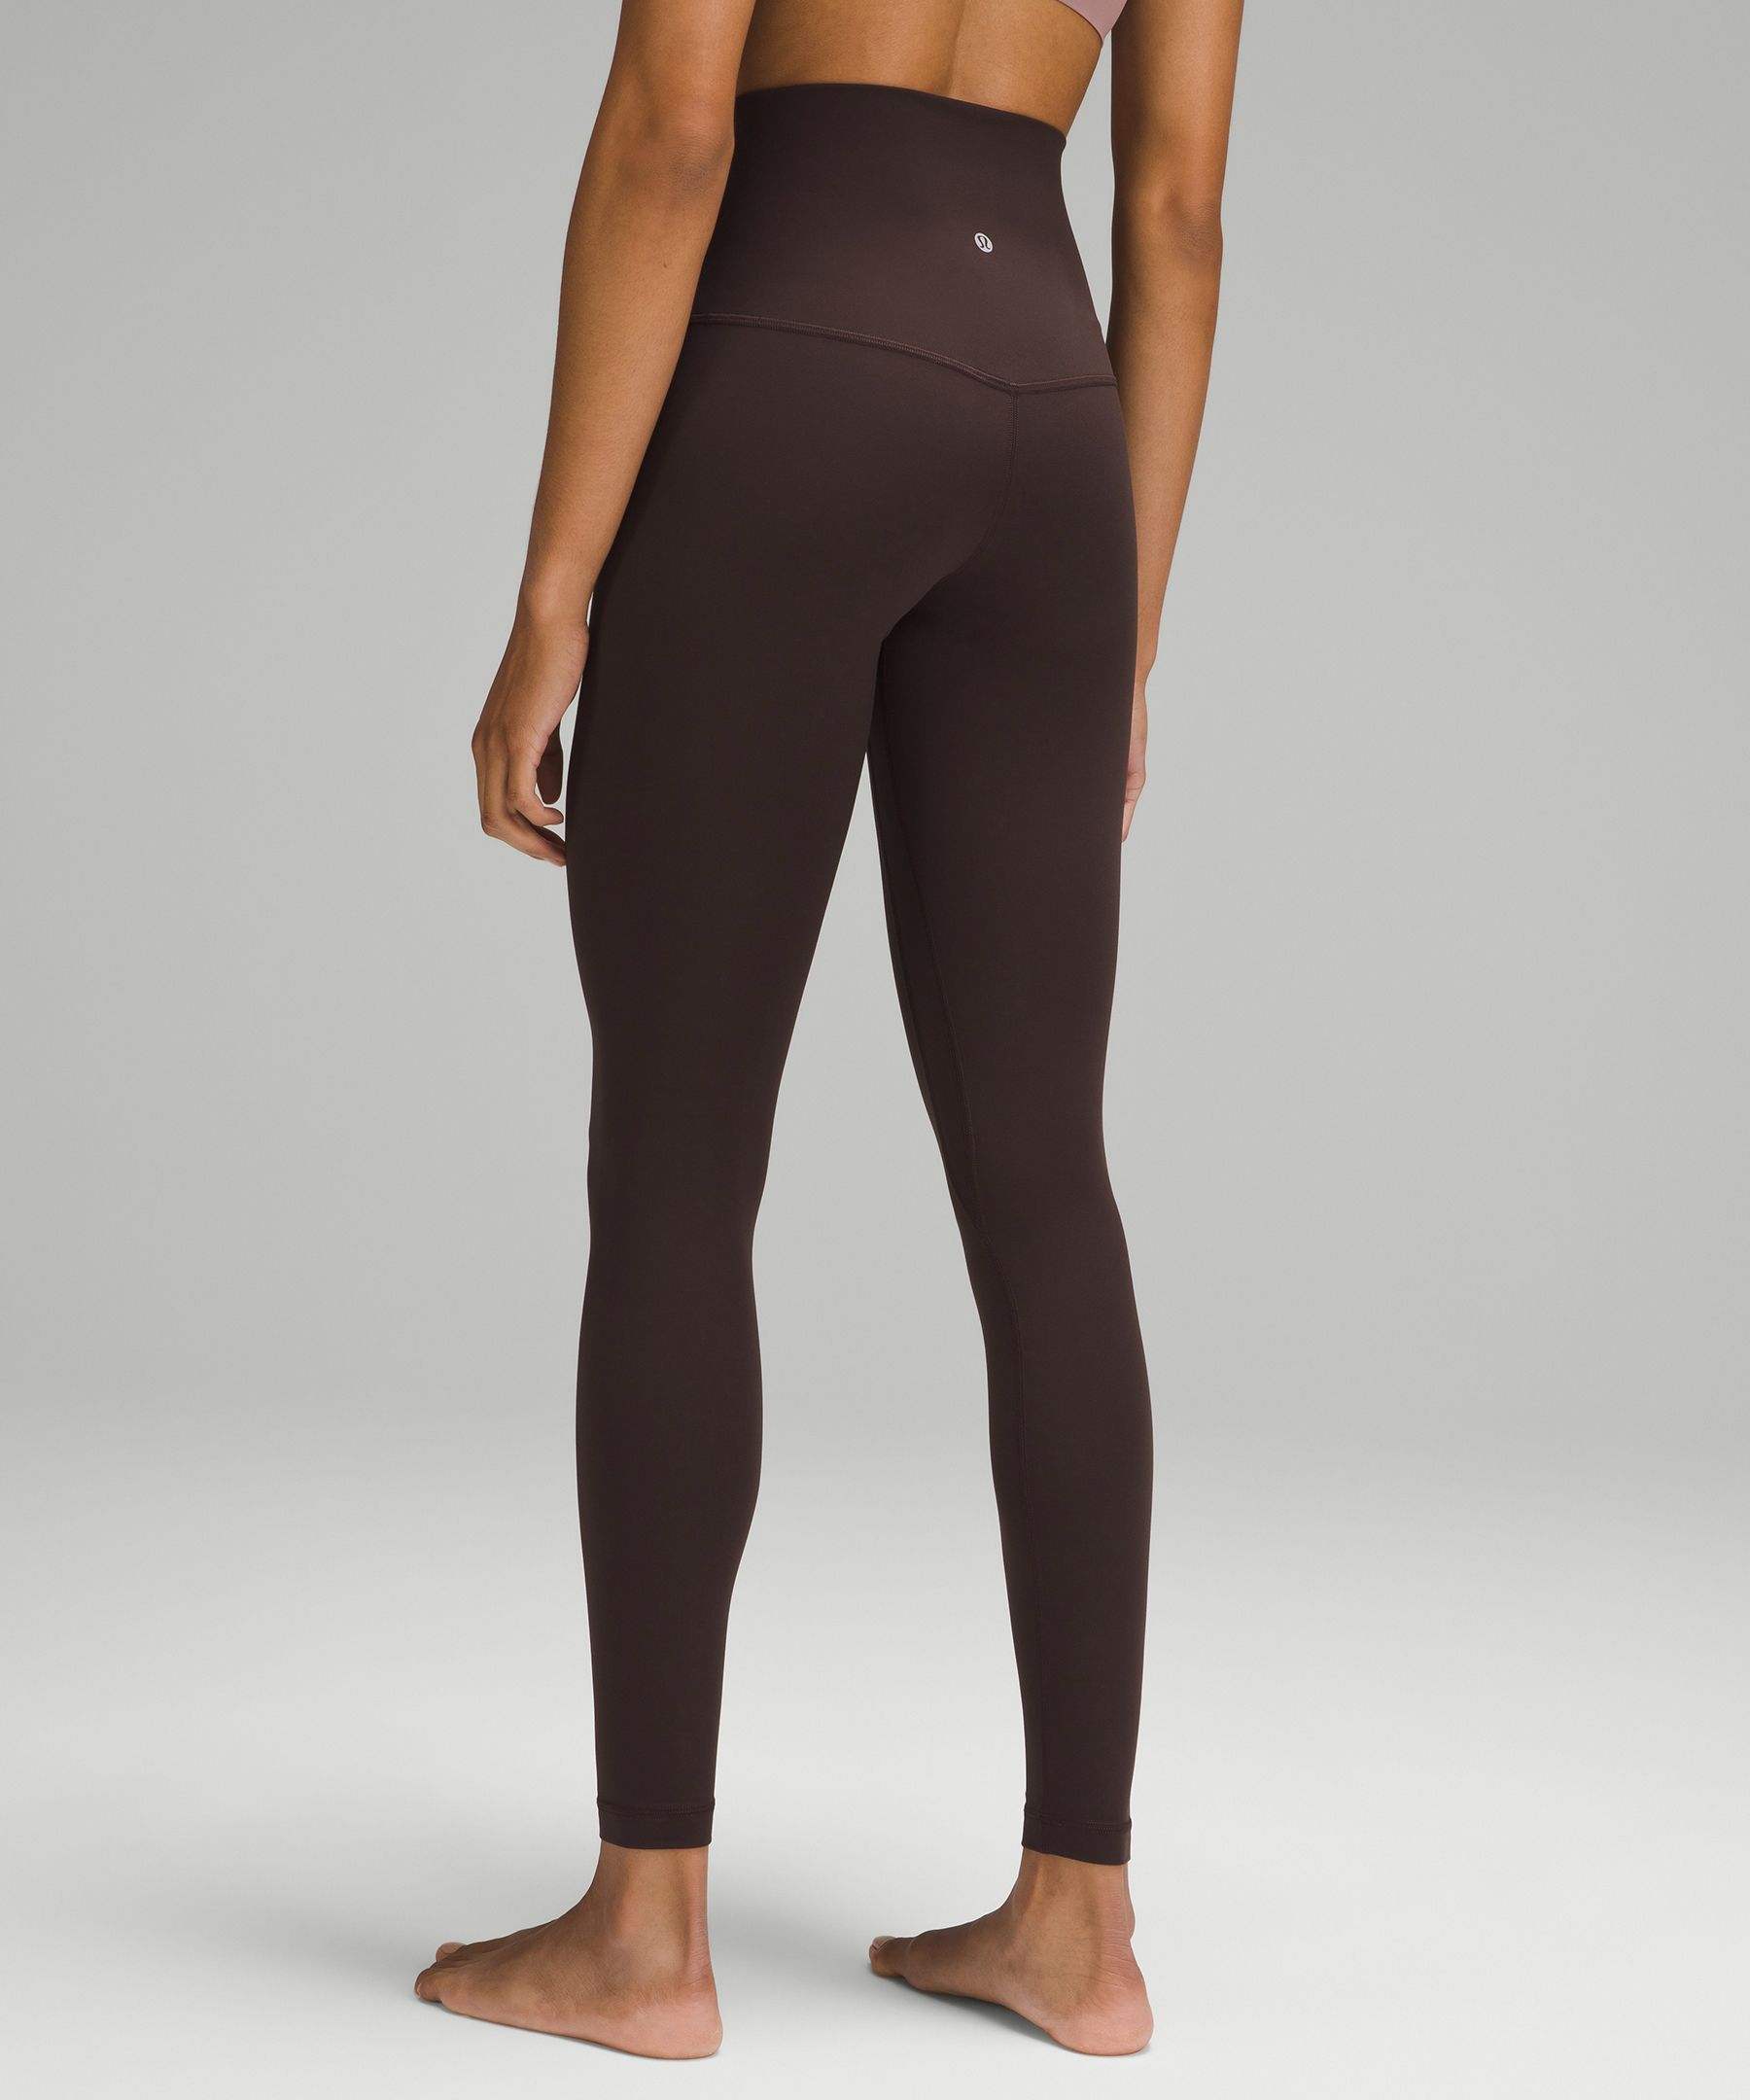 lululemon athletica Swift Speed High-rise Tight Leggings - 28 - Color Pink/neon  - Size 12